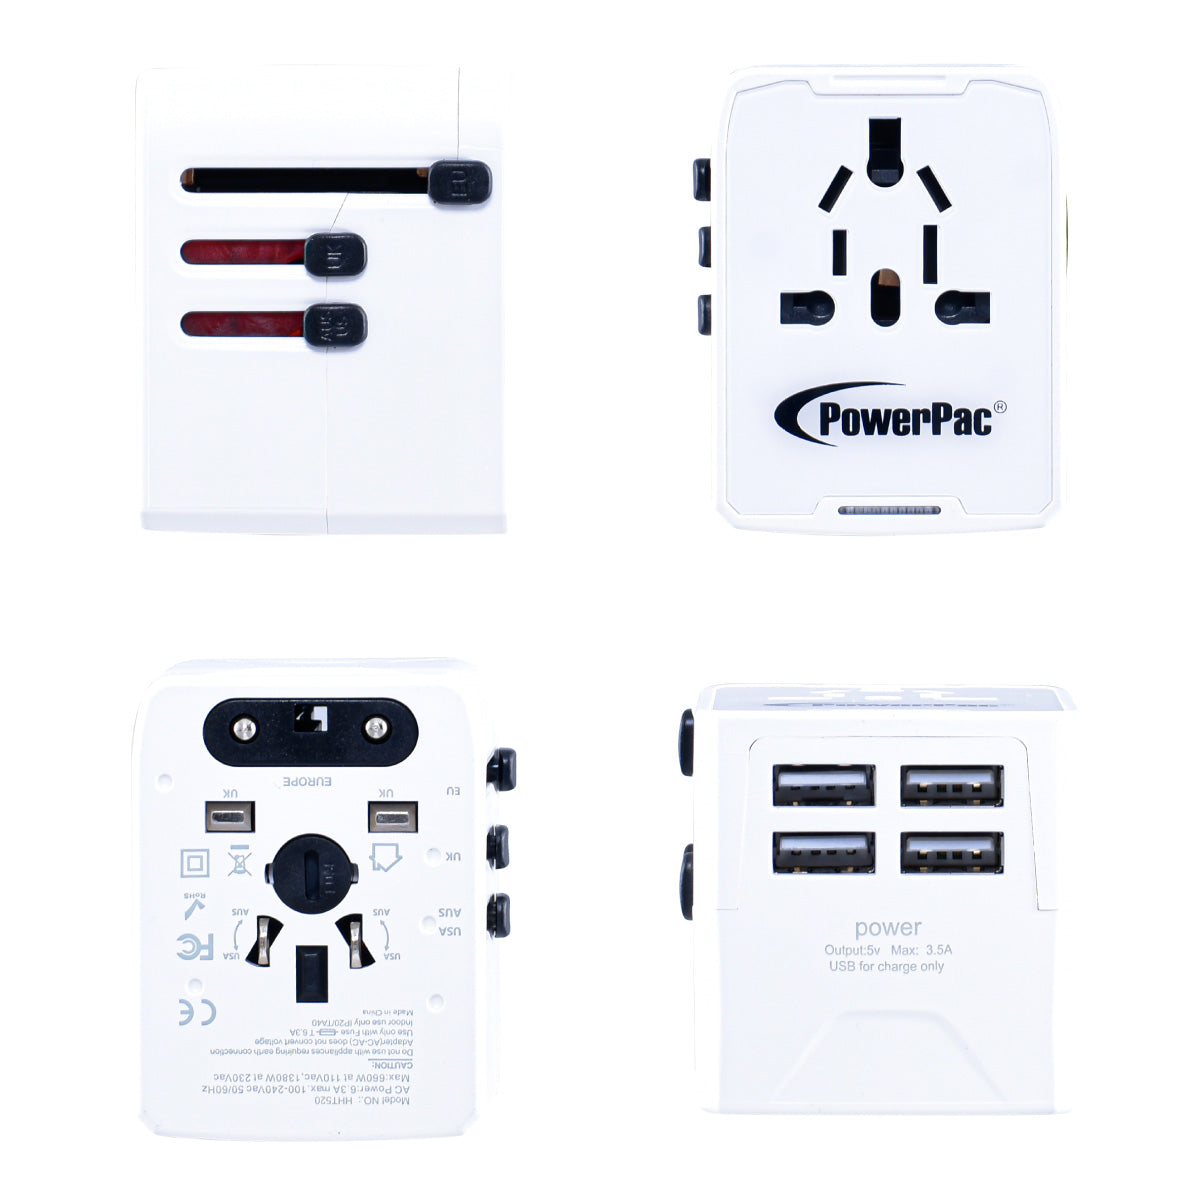 Multi Travel Adapter With 4 USB Charger (PP7981)